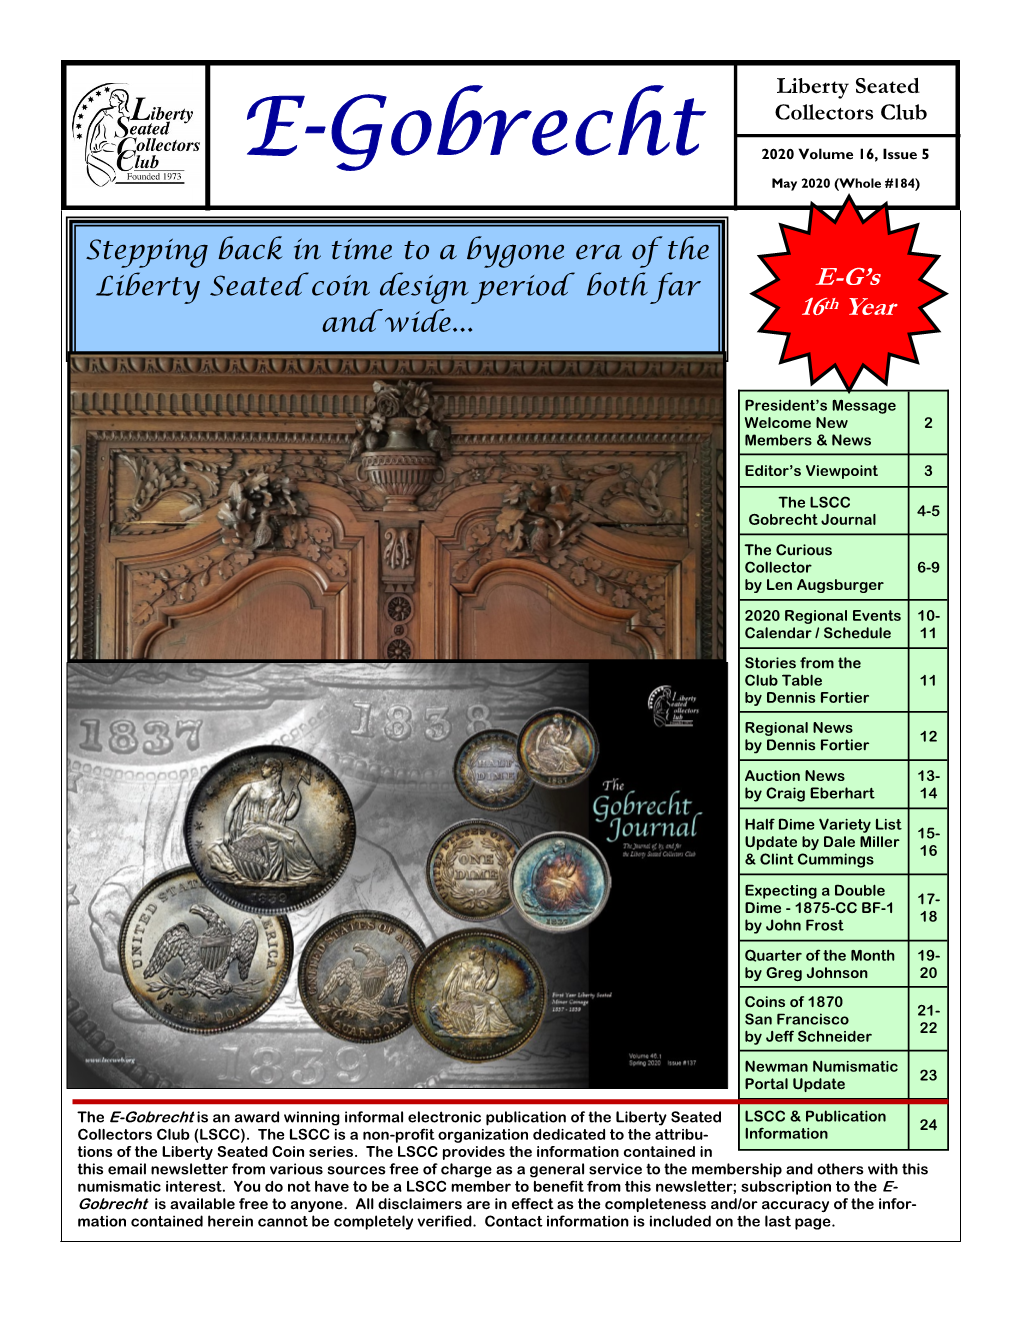 E-Gobrecht 2020 Volume 16, Issue 5 May 2020 (Whole #184)